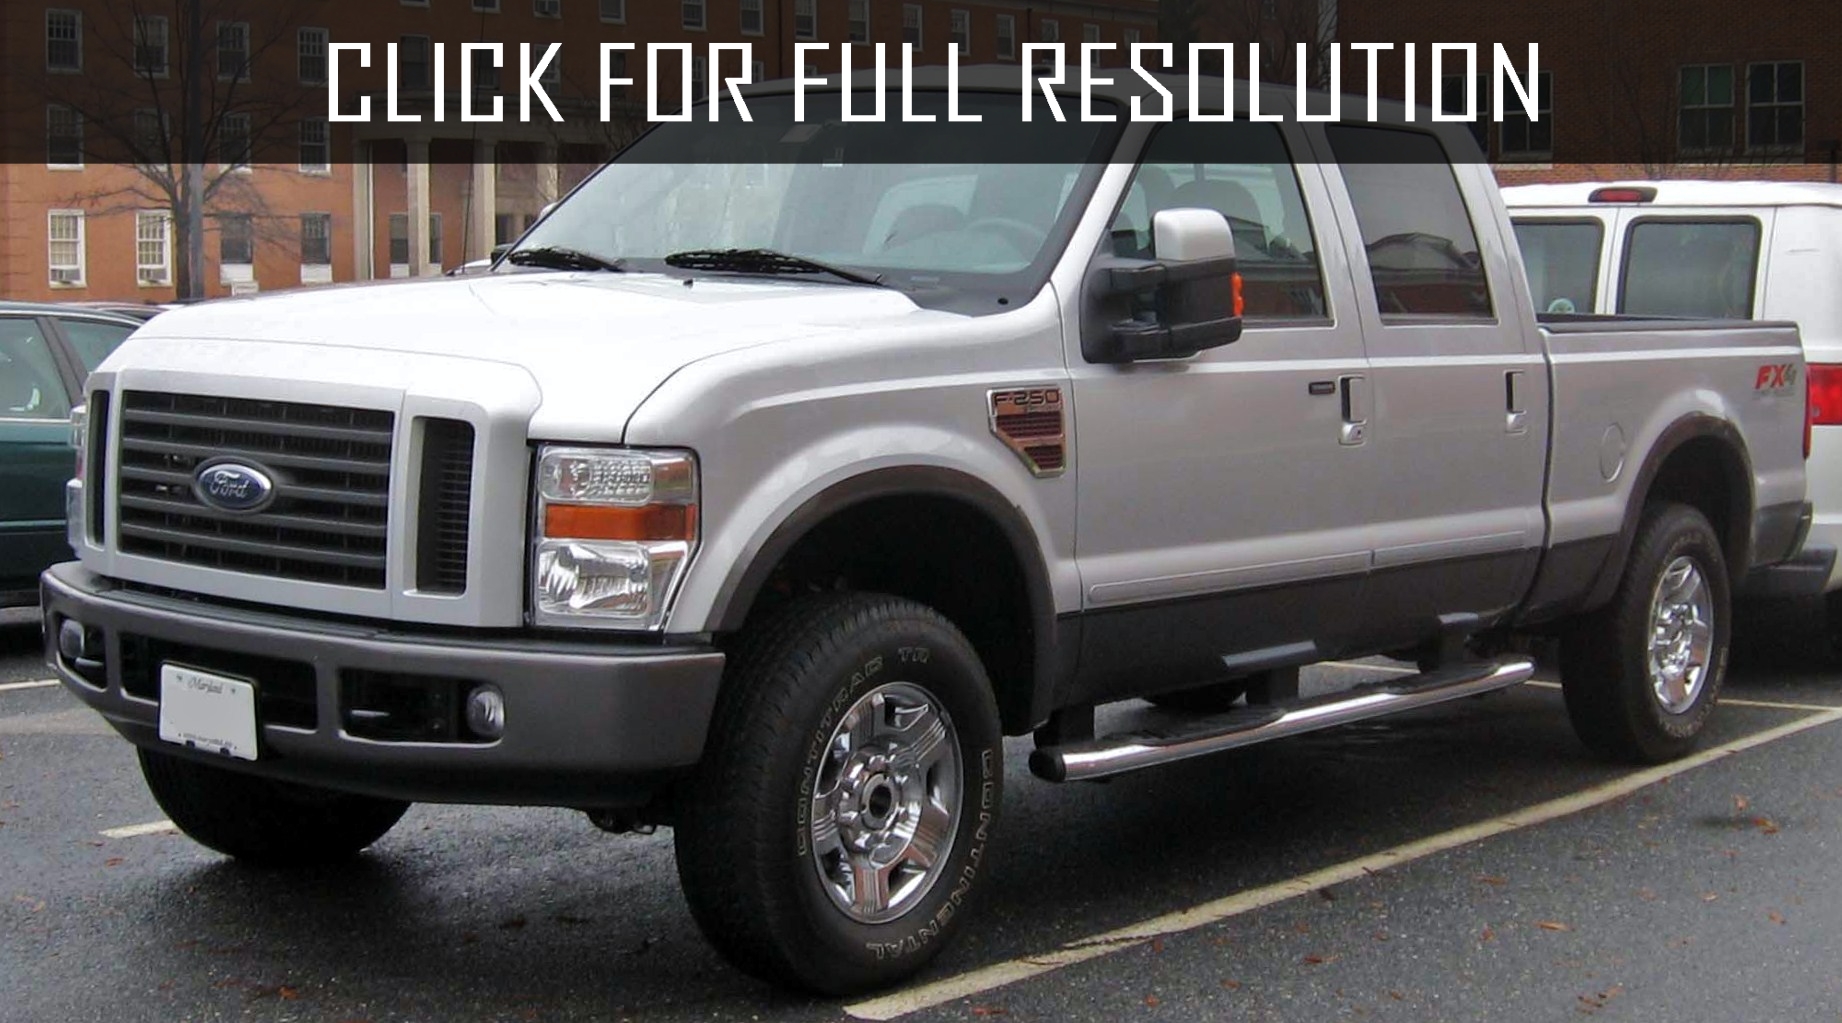 2009 Ford F250